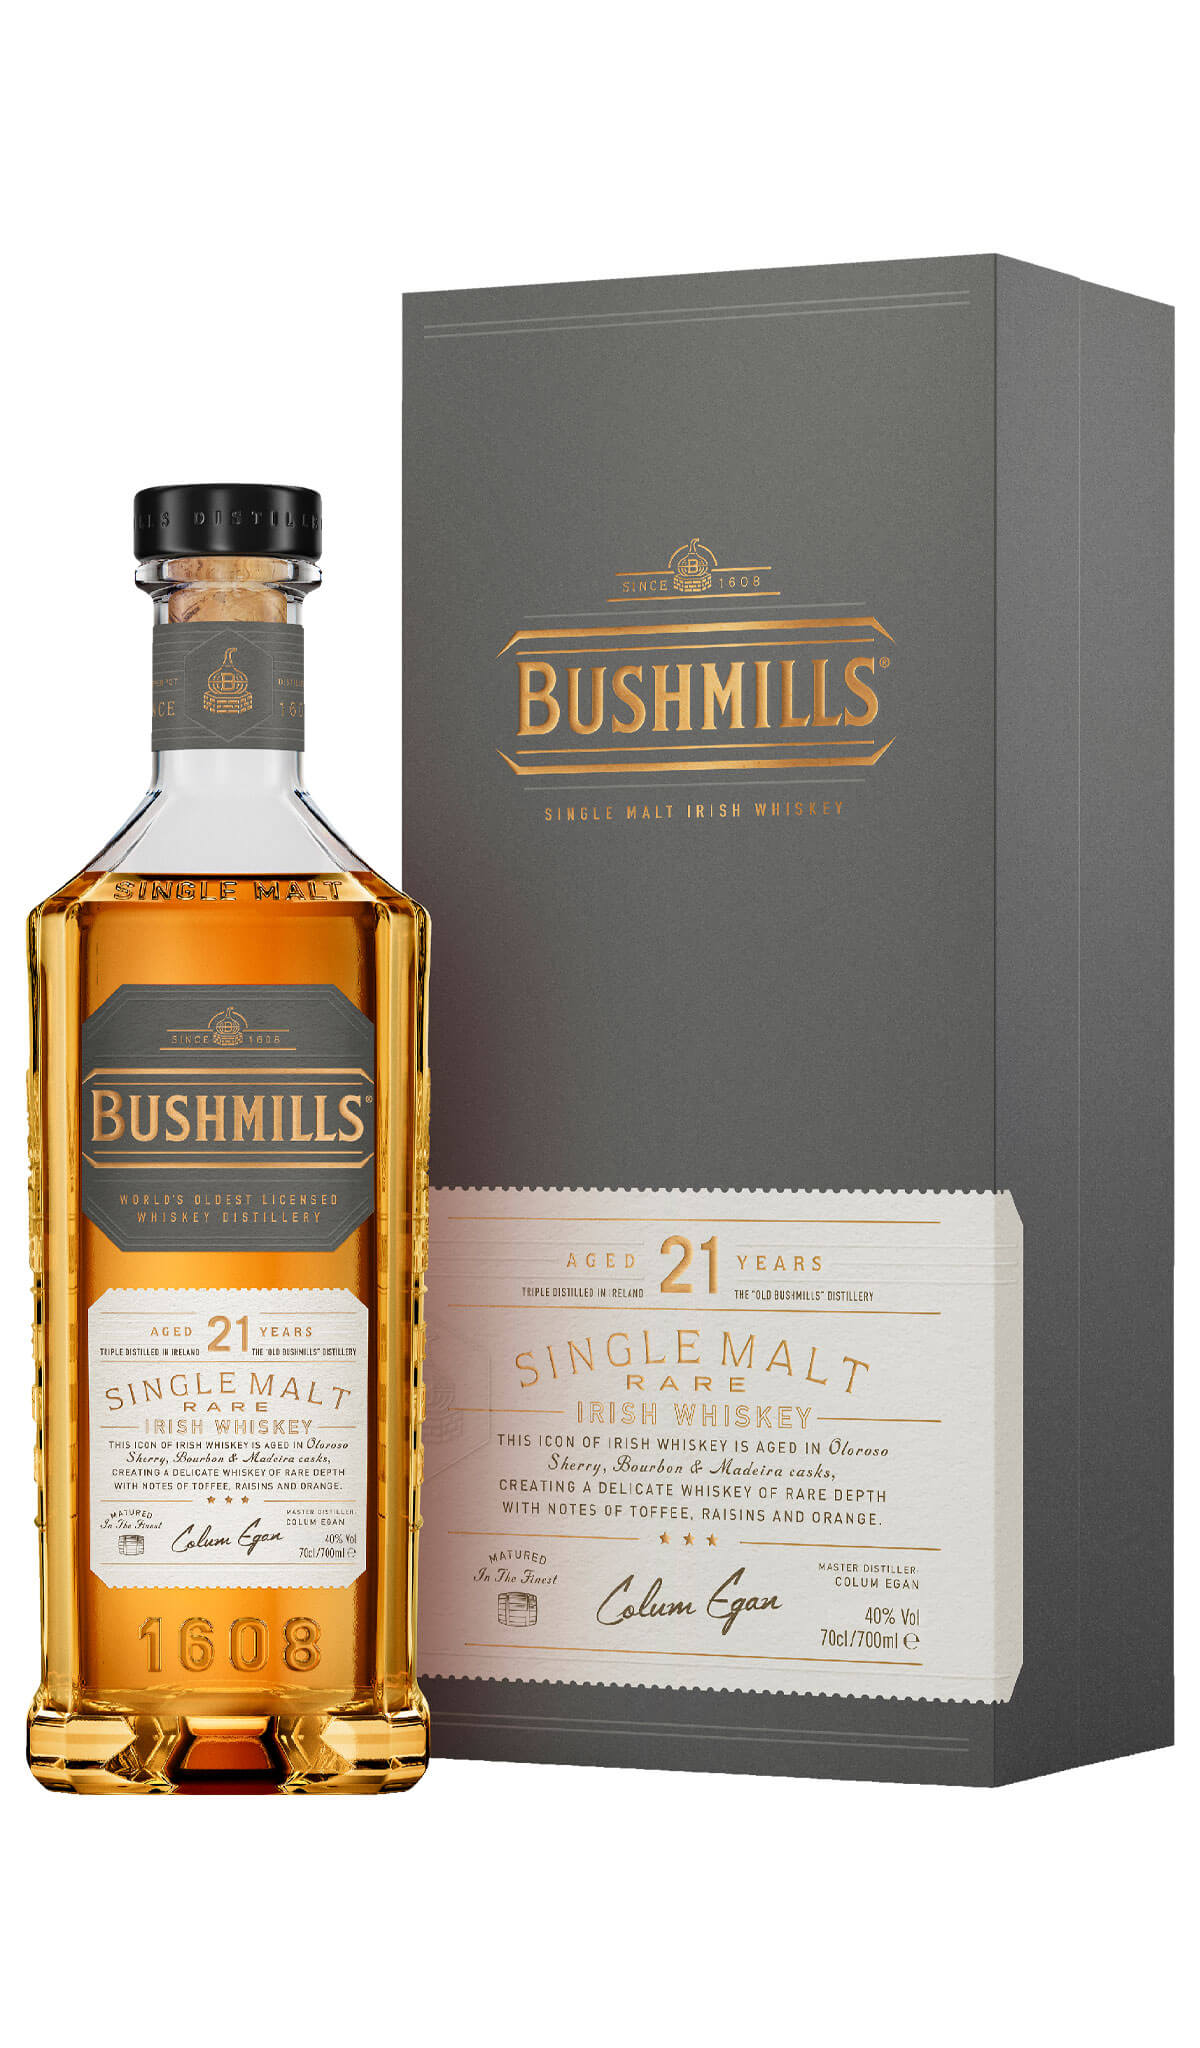 Find out more, explore the range and buy Bushmills 21 Year Old Rare Single Malt 700mL available online at Wine Sellers Direct - Australia's independent liquor specialists.